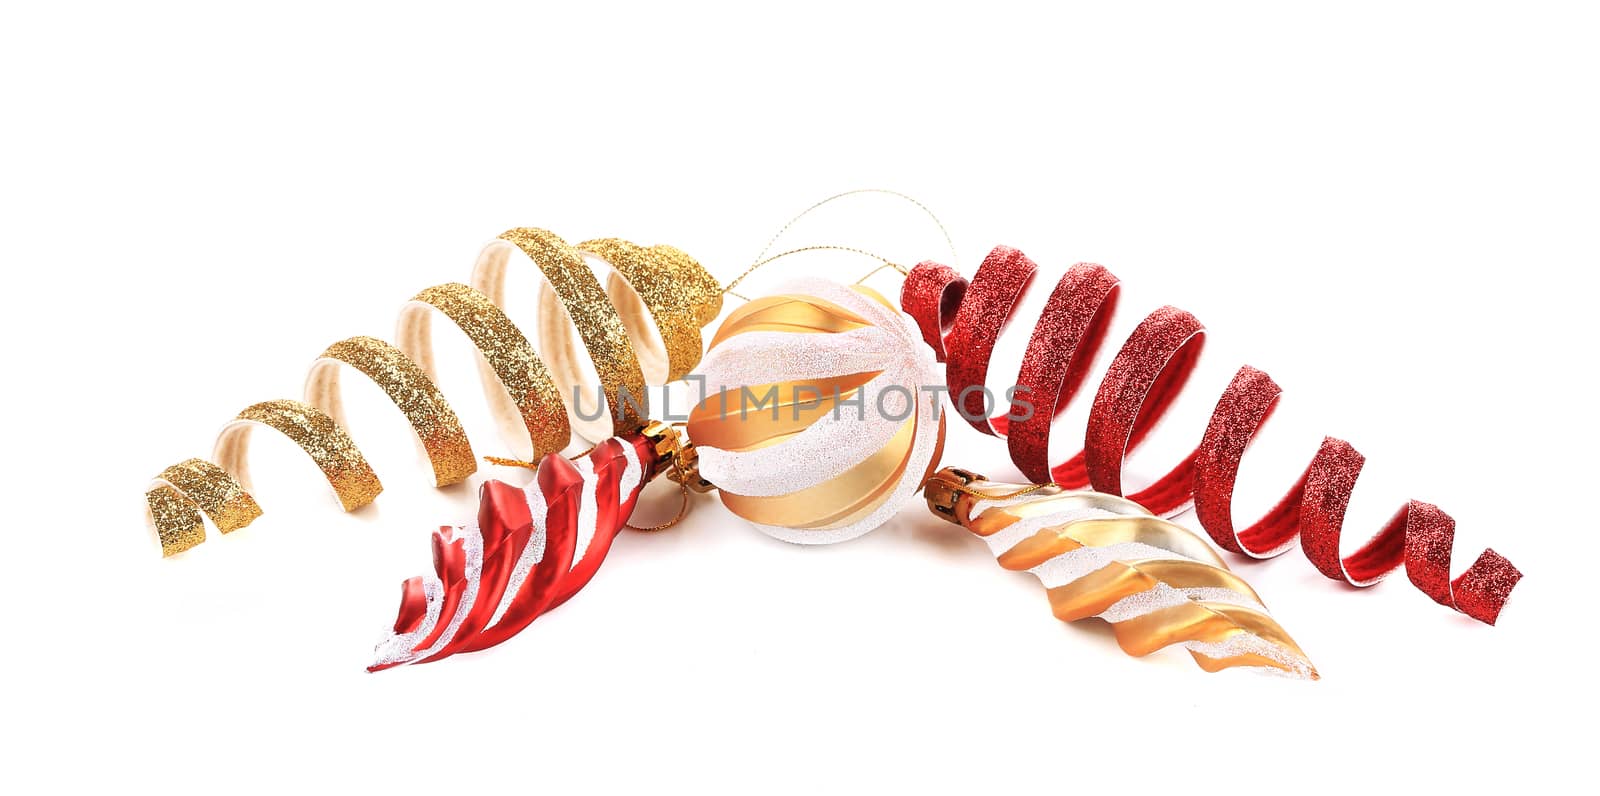 Composition with christmas decoration. Isolated on a white background.